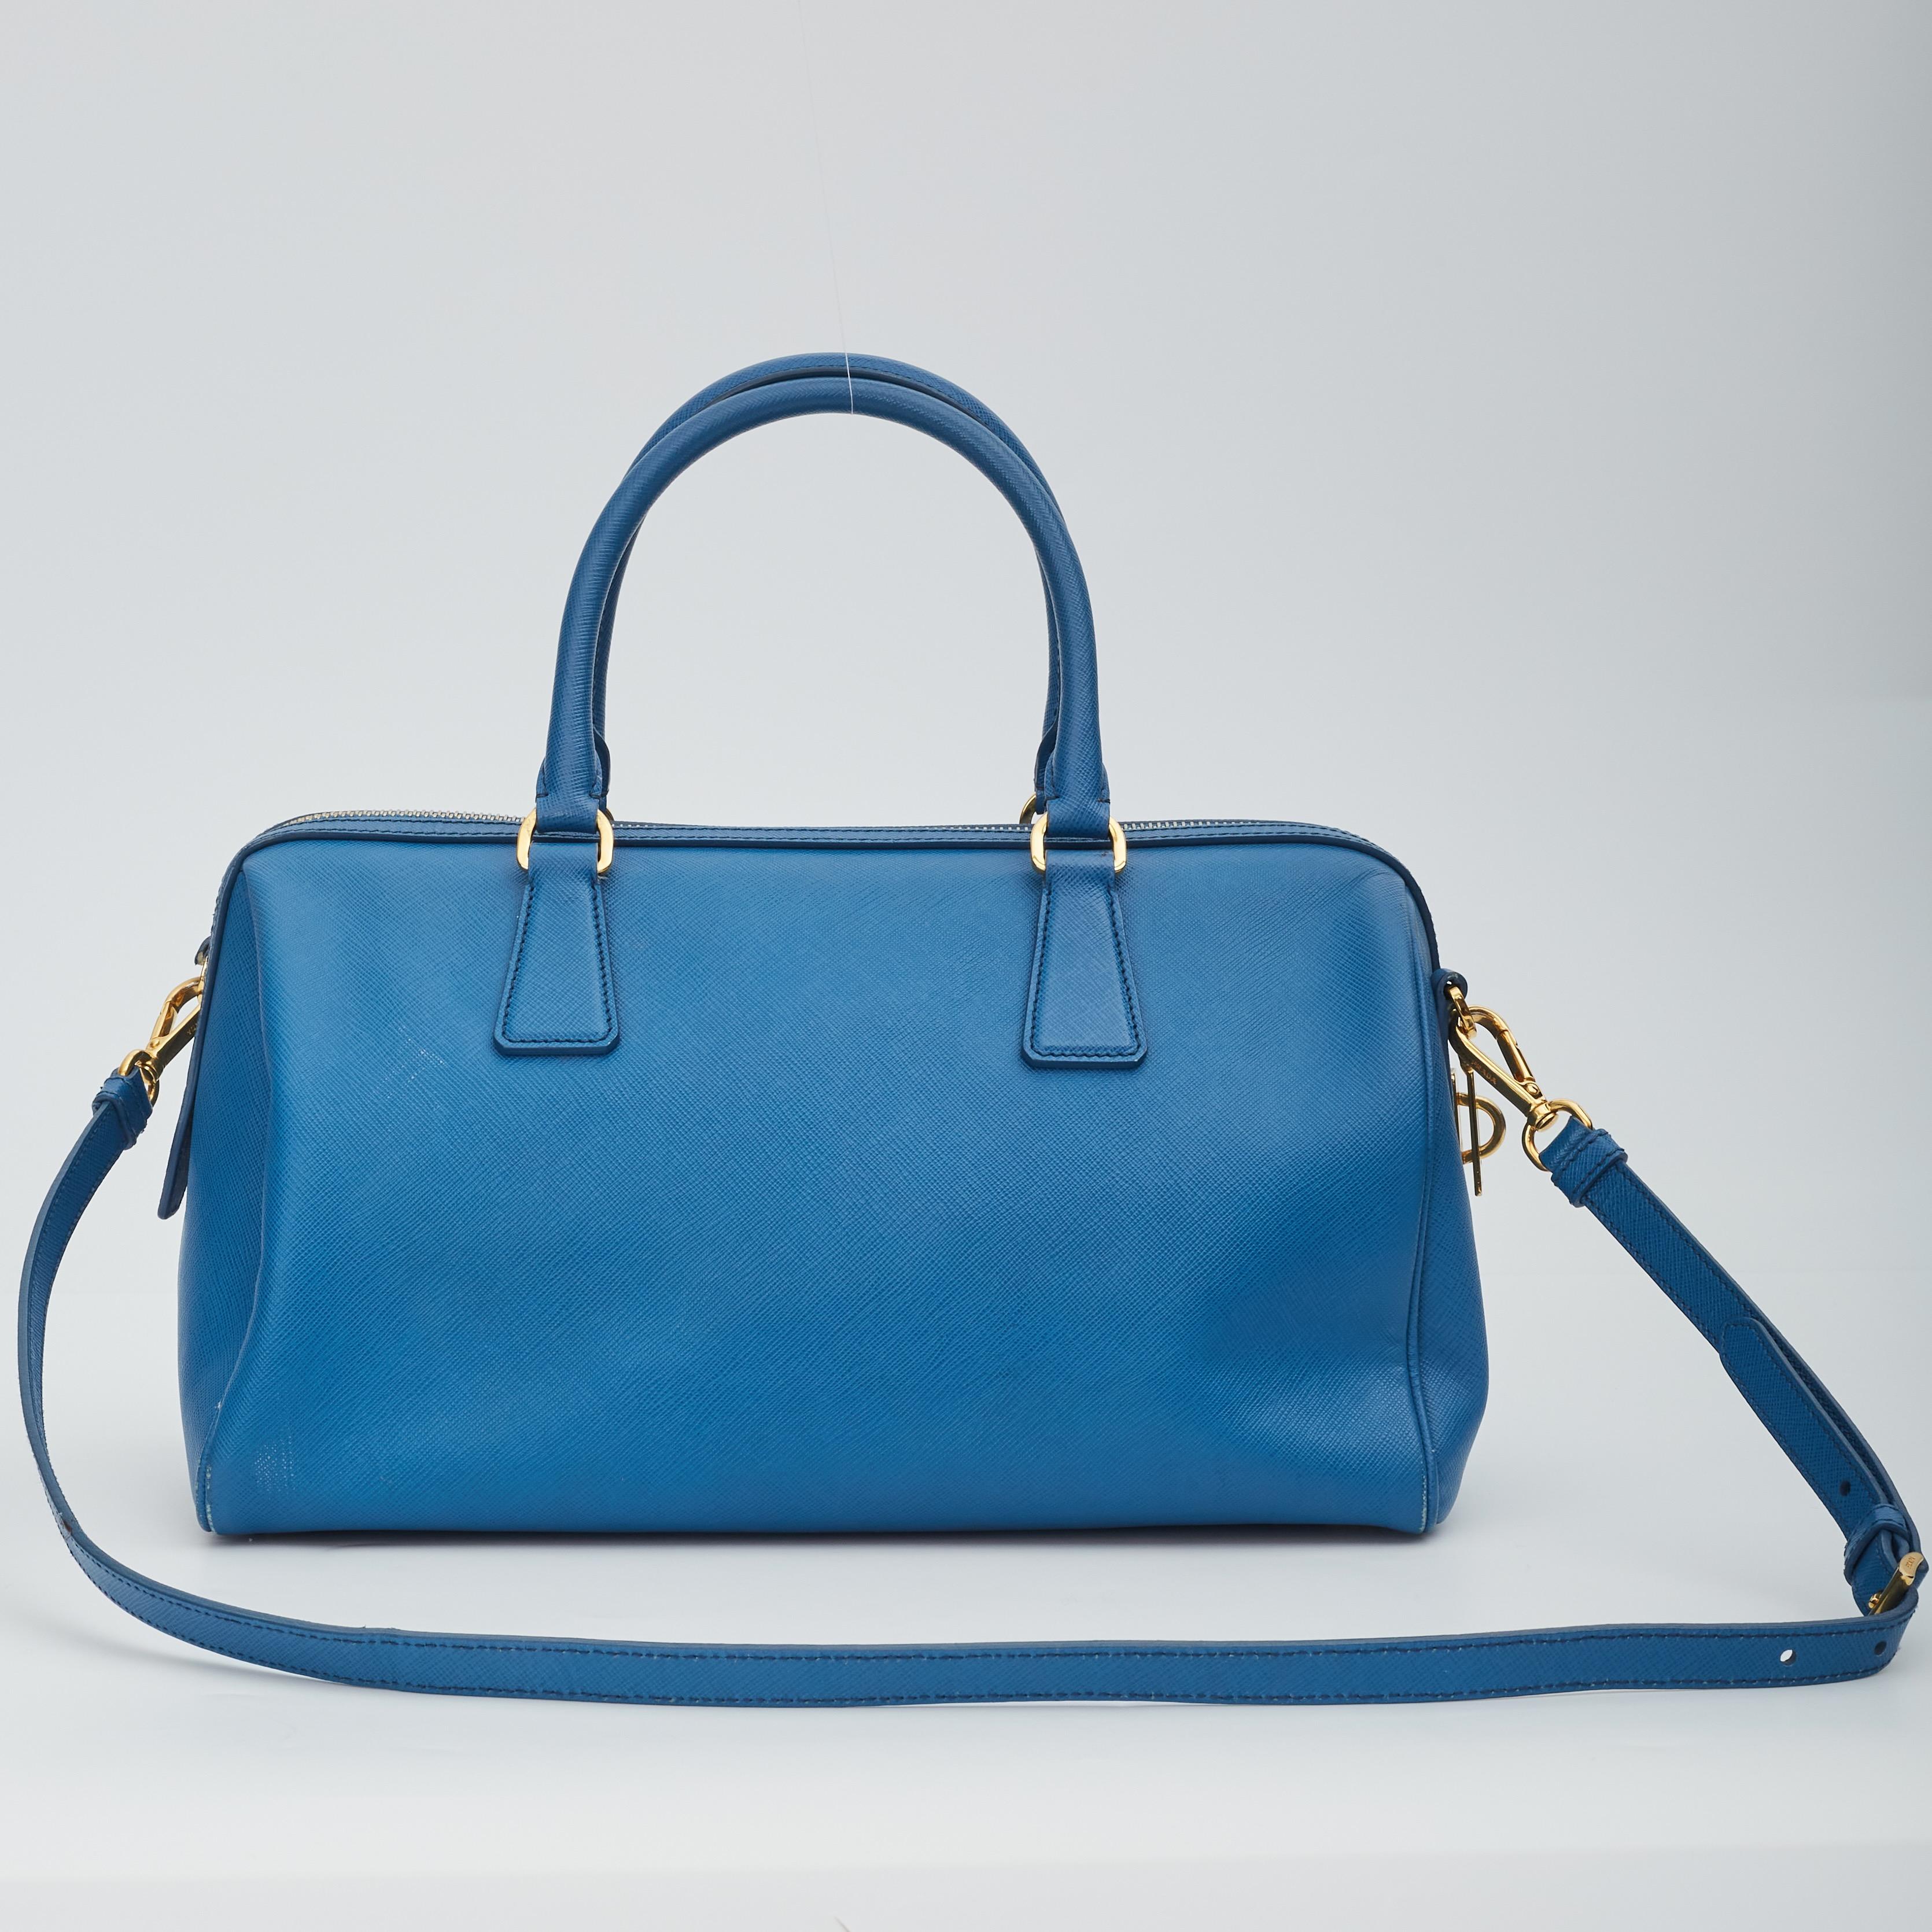 Color: Blue
Material: Saffiano leather
Item Code: 25
Measures: H 8” x L 13” x D 7”
Drop: 4” & 17”
Comes With: Shoulder strap.
Condition: Good. Corner wear, smudges, light scuffs and marks to exterior. Stain to interior.


Made in Italy